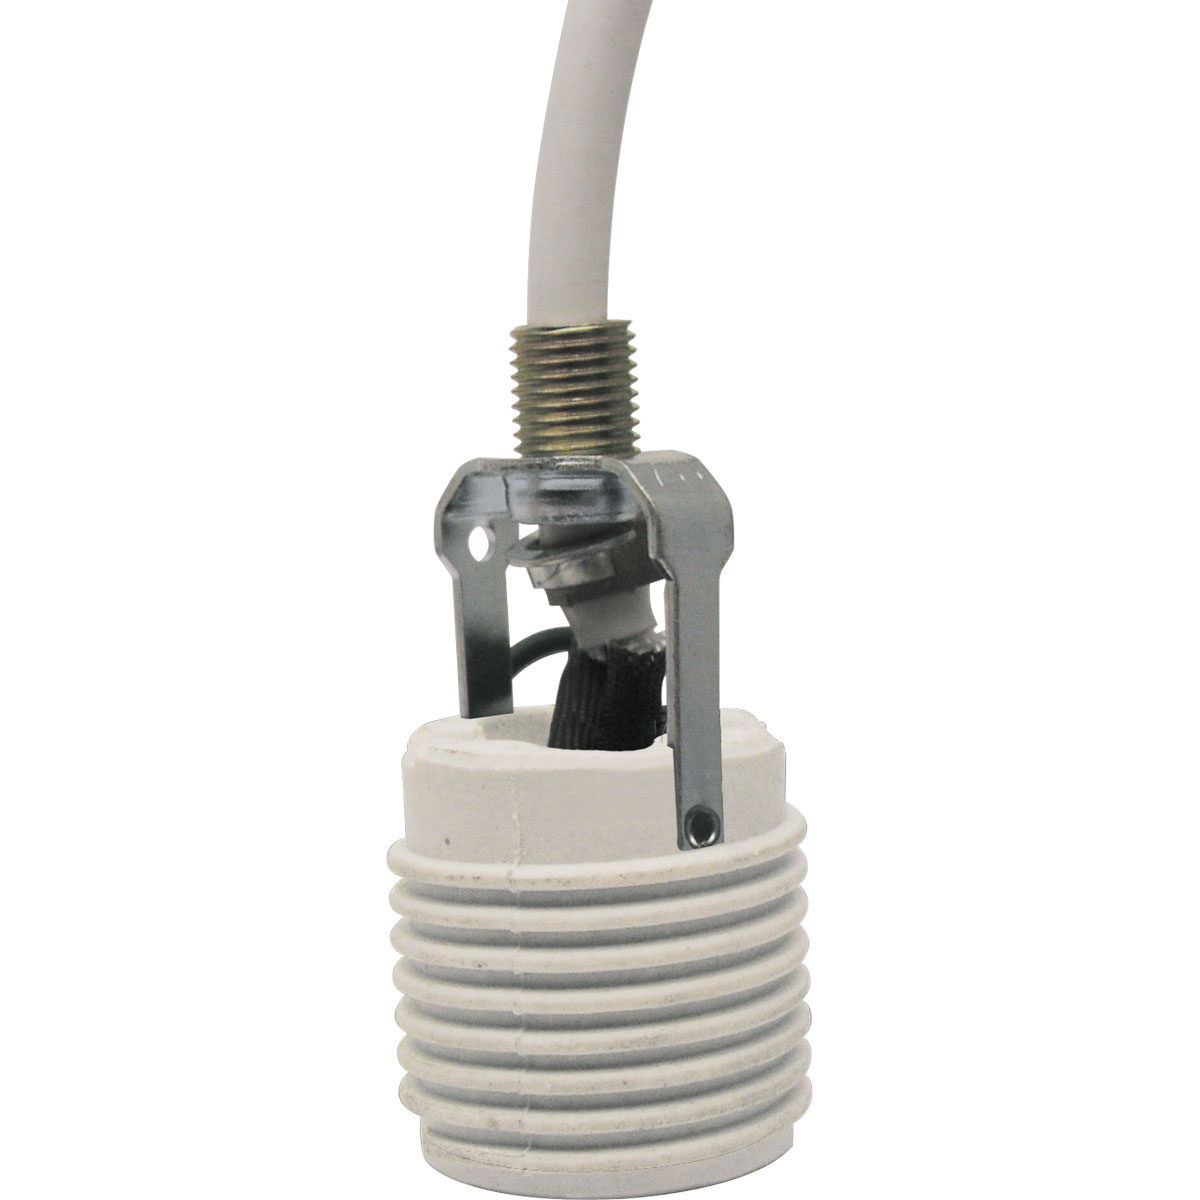 Cord extender for high ceilings is for use with P4401, P4402, P4403, P4406 and P5094. Provides additional length to cord-hung fixtures (only) for installations on high ceilings and in stairwells. Includes cord and socket.